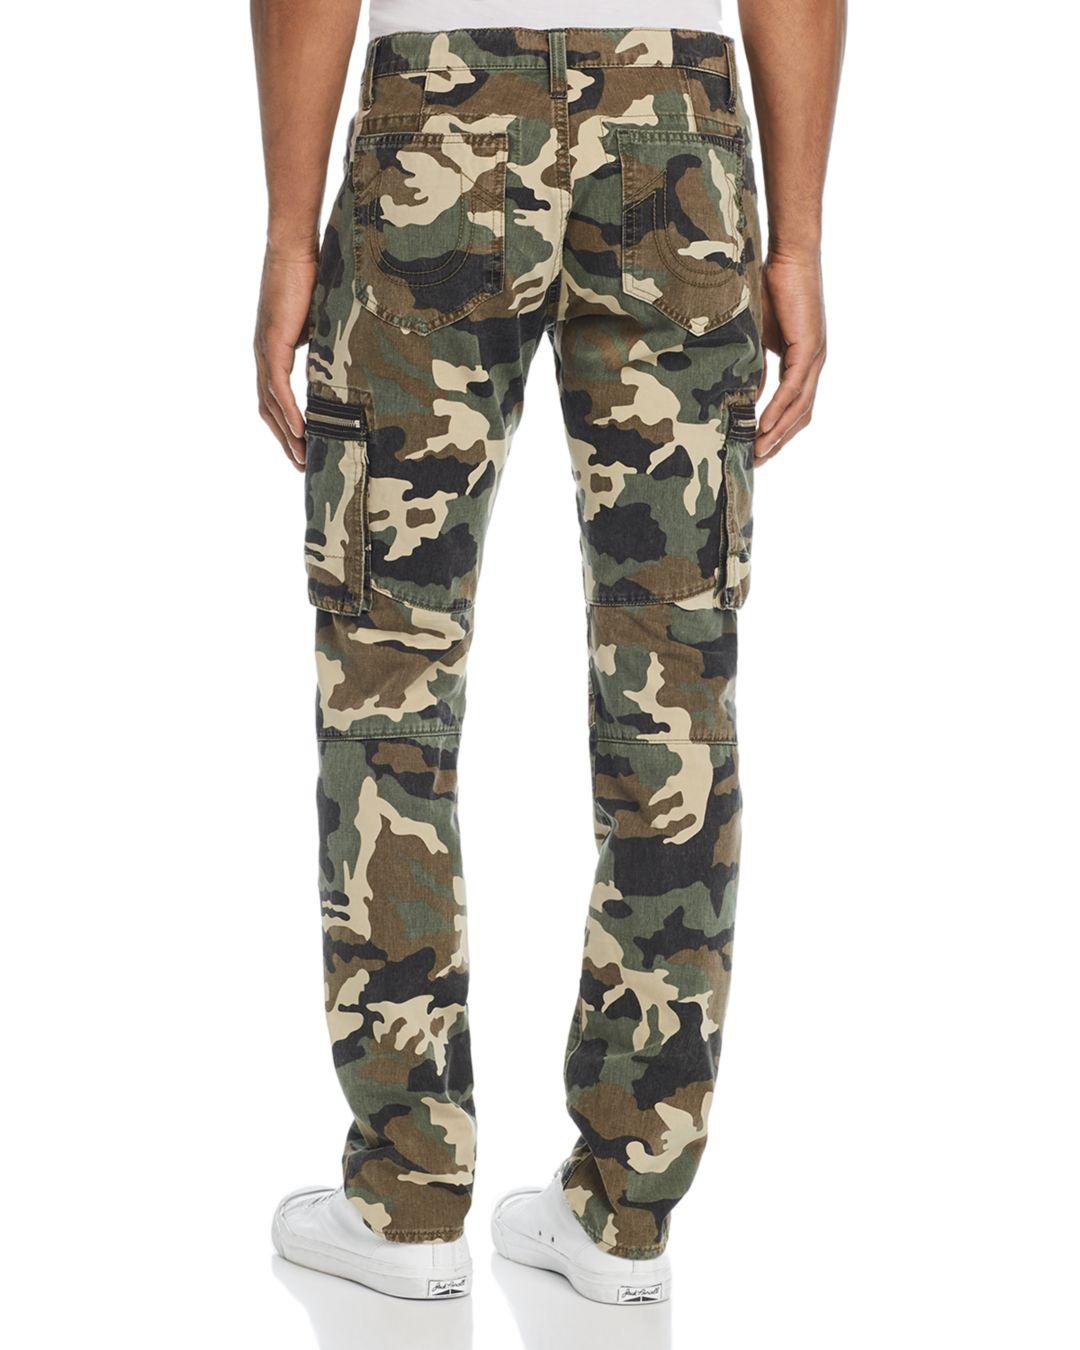 True Religion Nomad Camouflage Print Regular Fit Cargo Pants in Camo ...